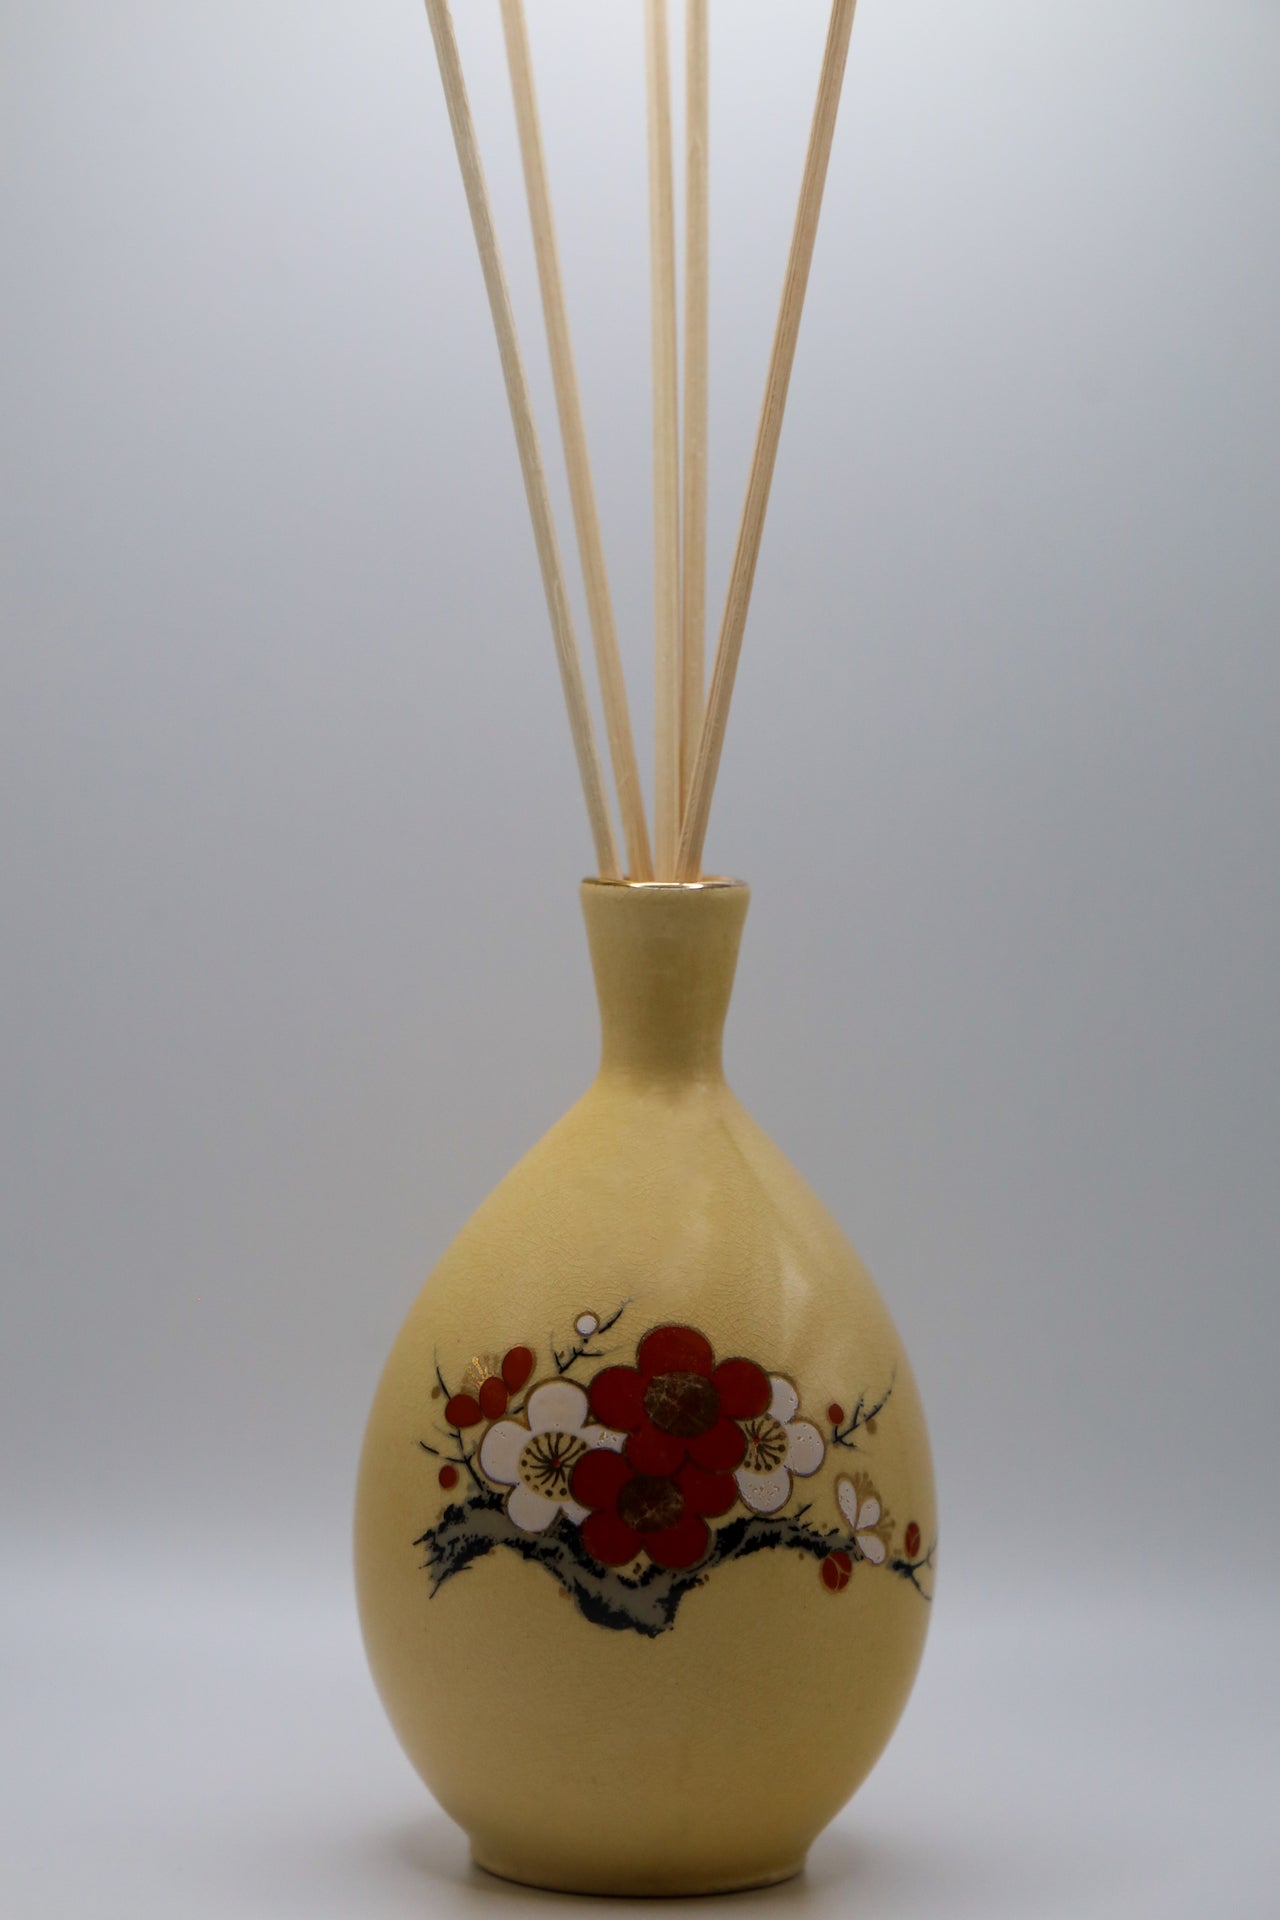 Cherry Blossom Bud Vase as scent diffuser